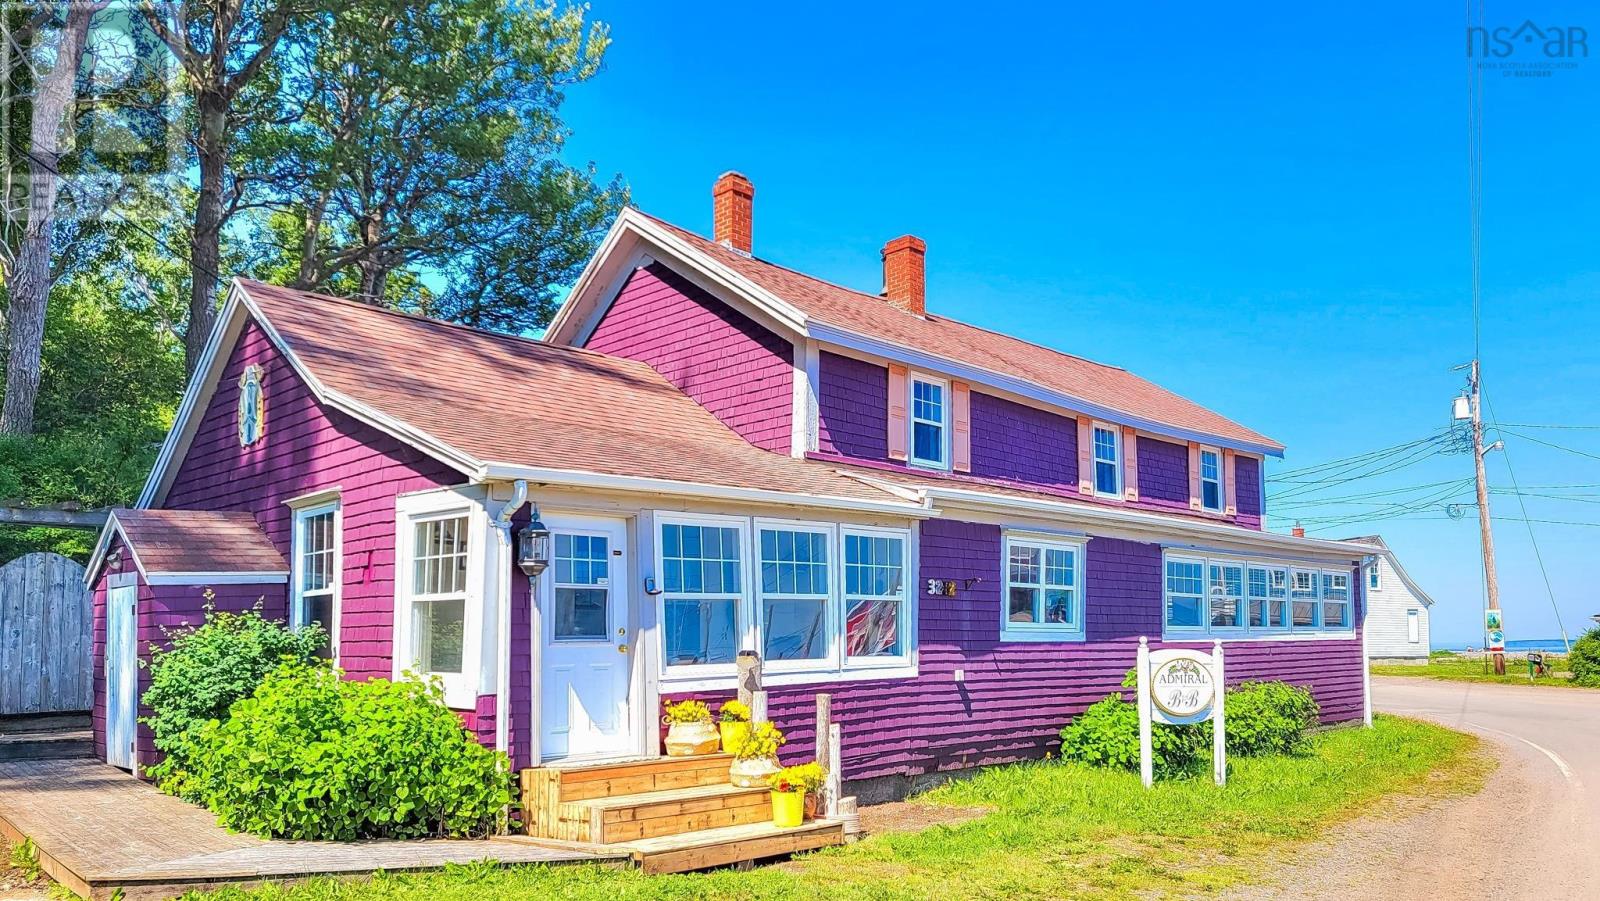 3282 Long Point Road located in Harbourville, Nova Scotia